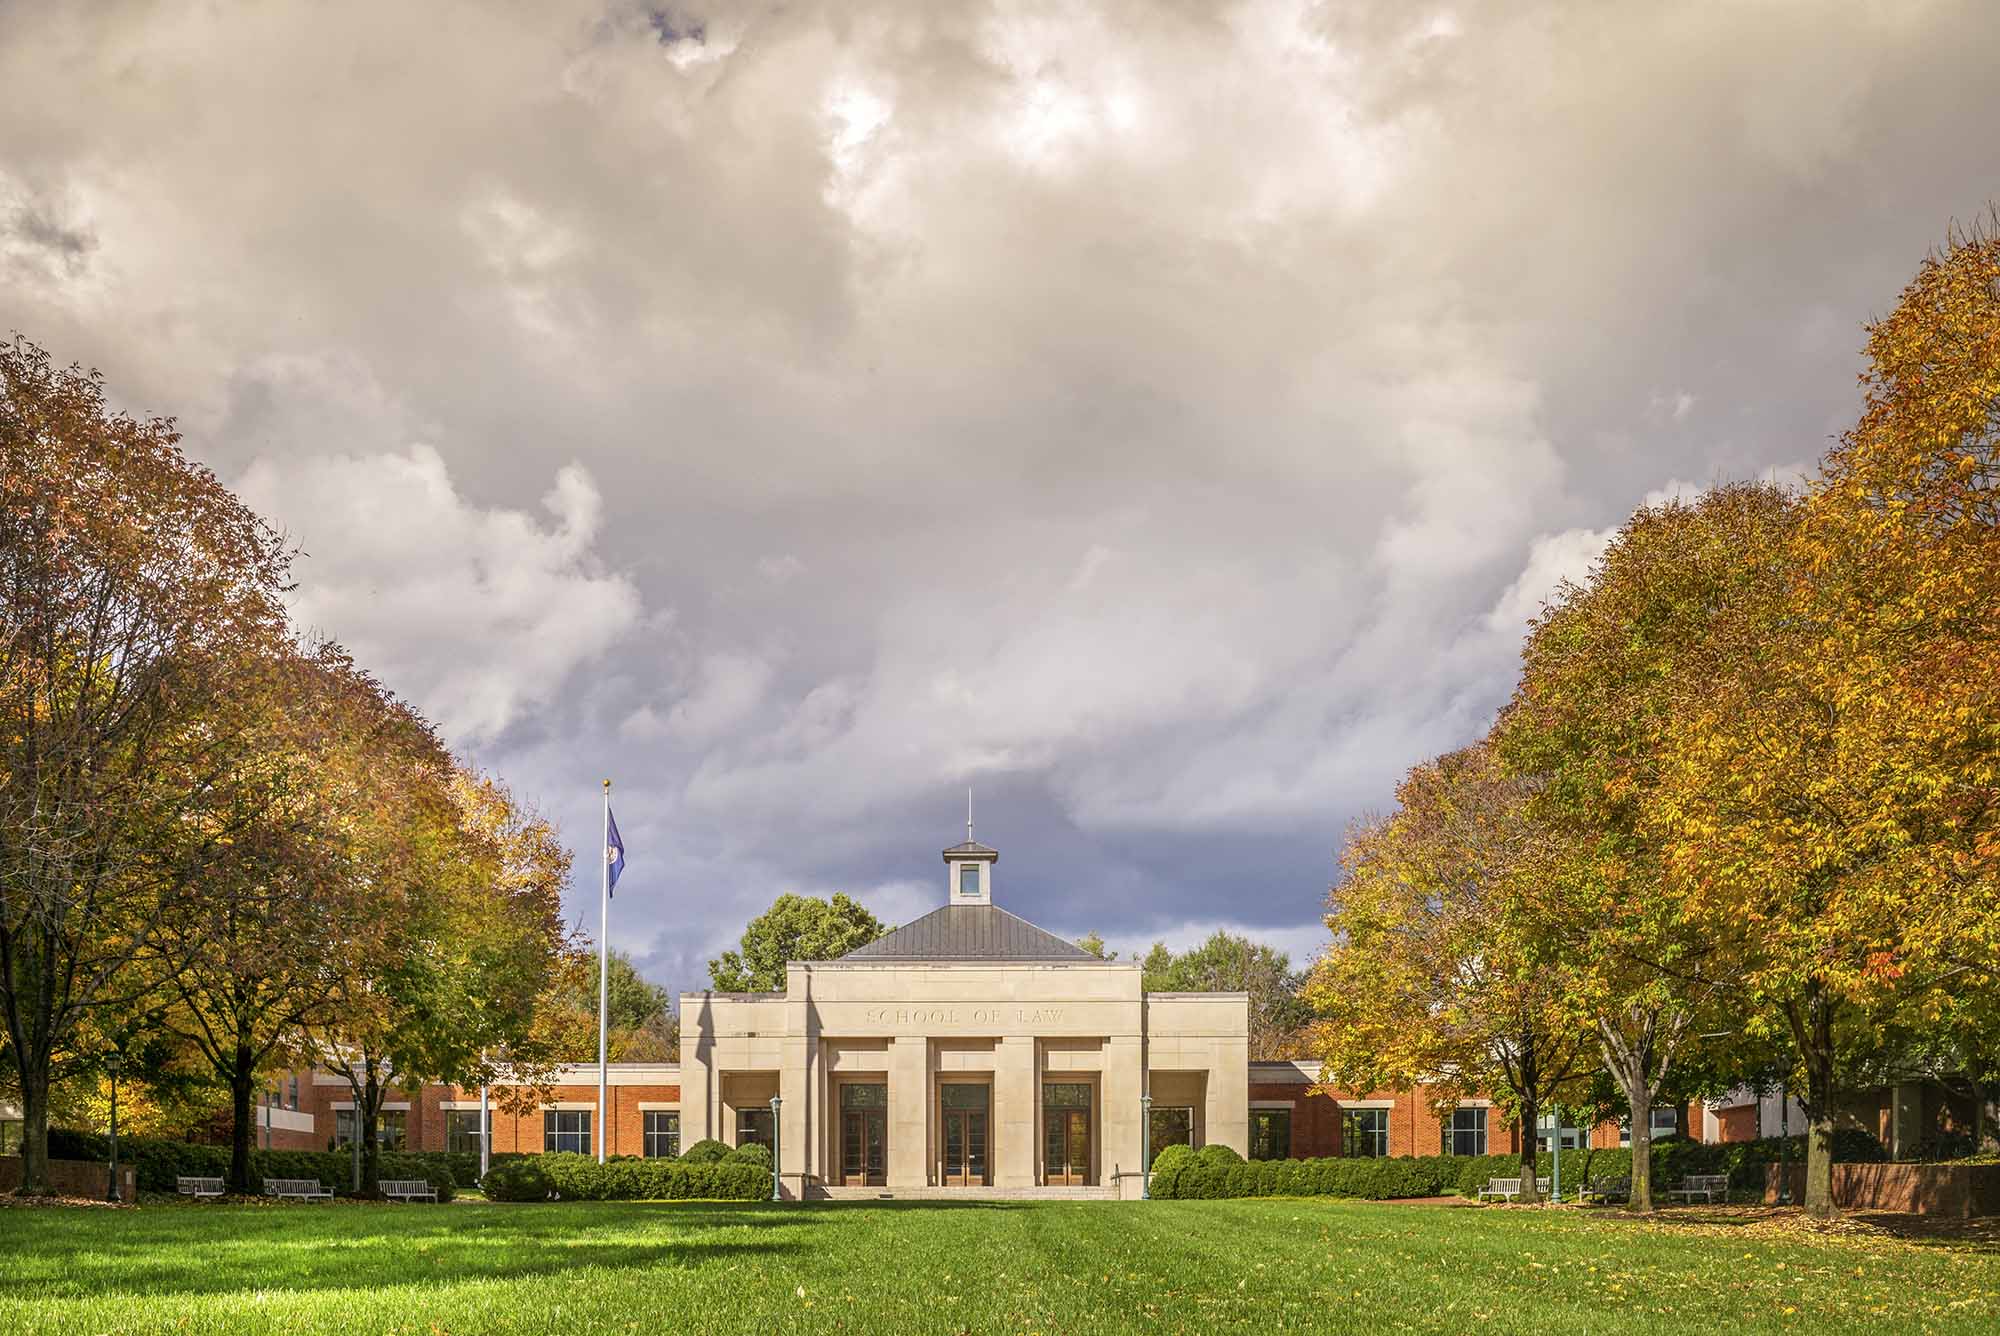 UVA Law school building's front entrance as storm clouds move in